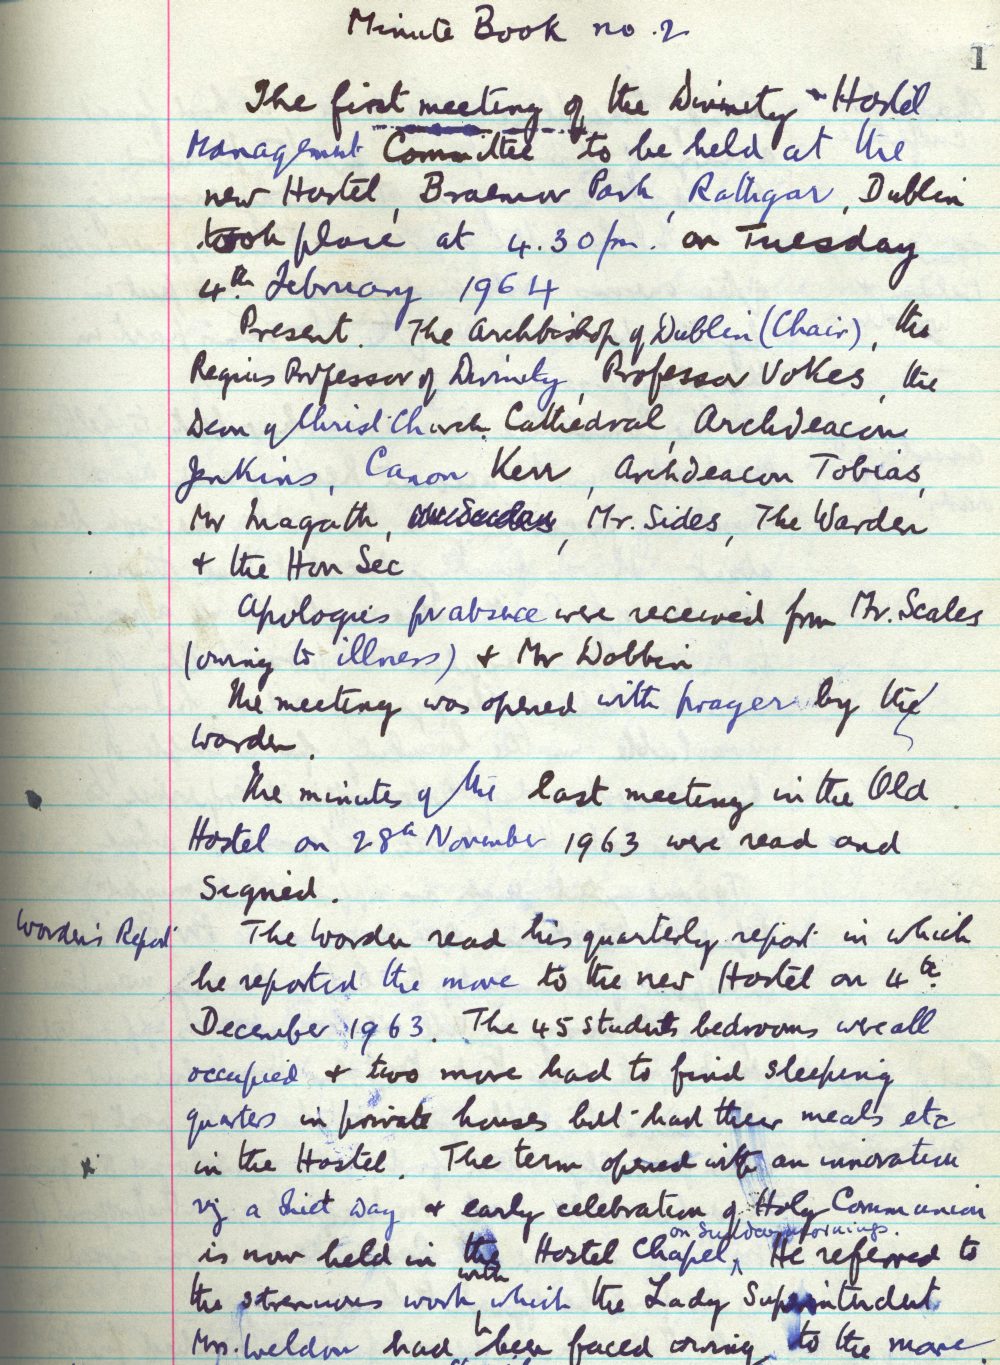 Opening minute of the Management Committee held at the new hostel, 4 February 1964, in RCB Library, Divinity Hostel Minute Book no. 2, 1964-2000